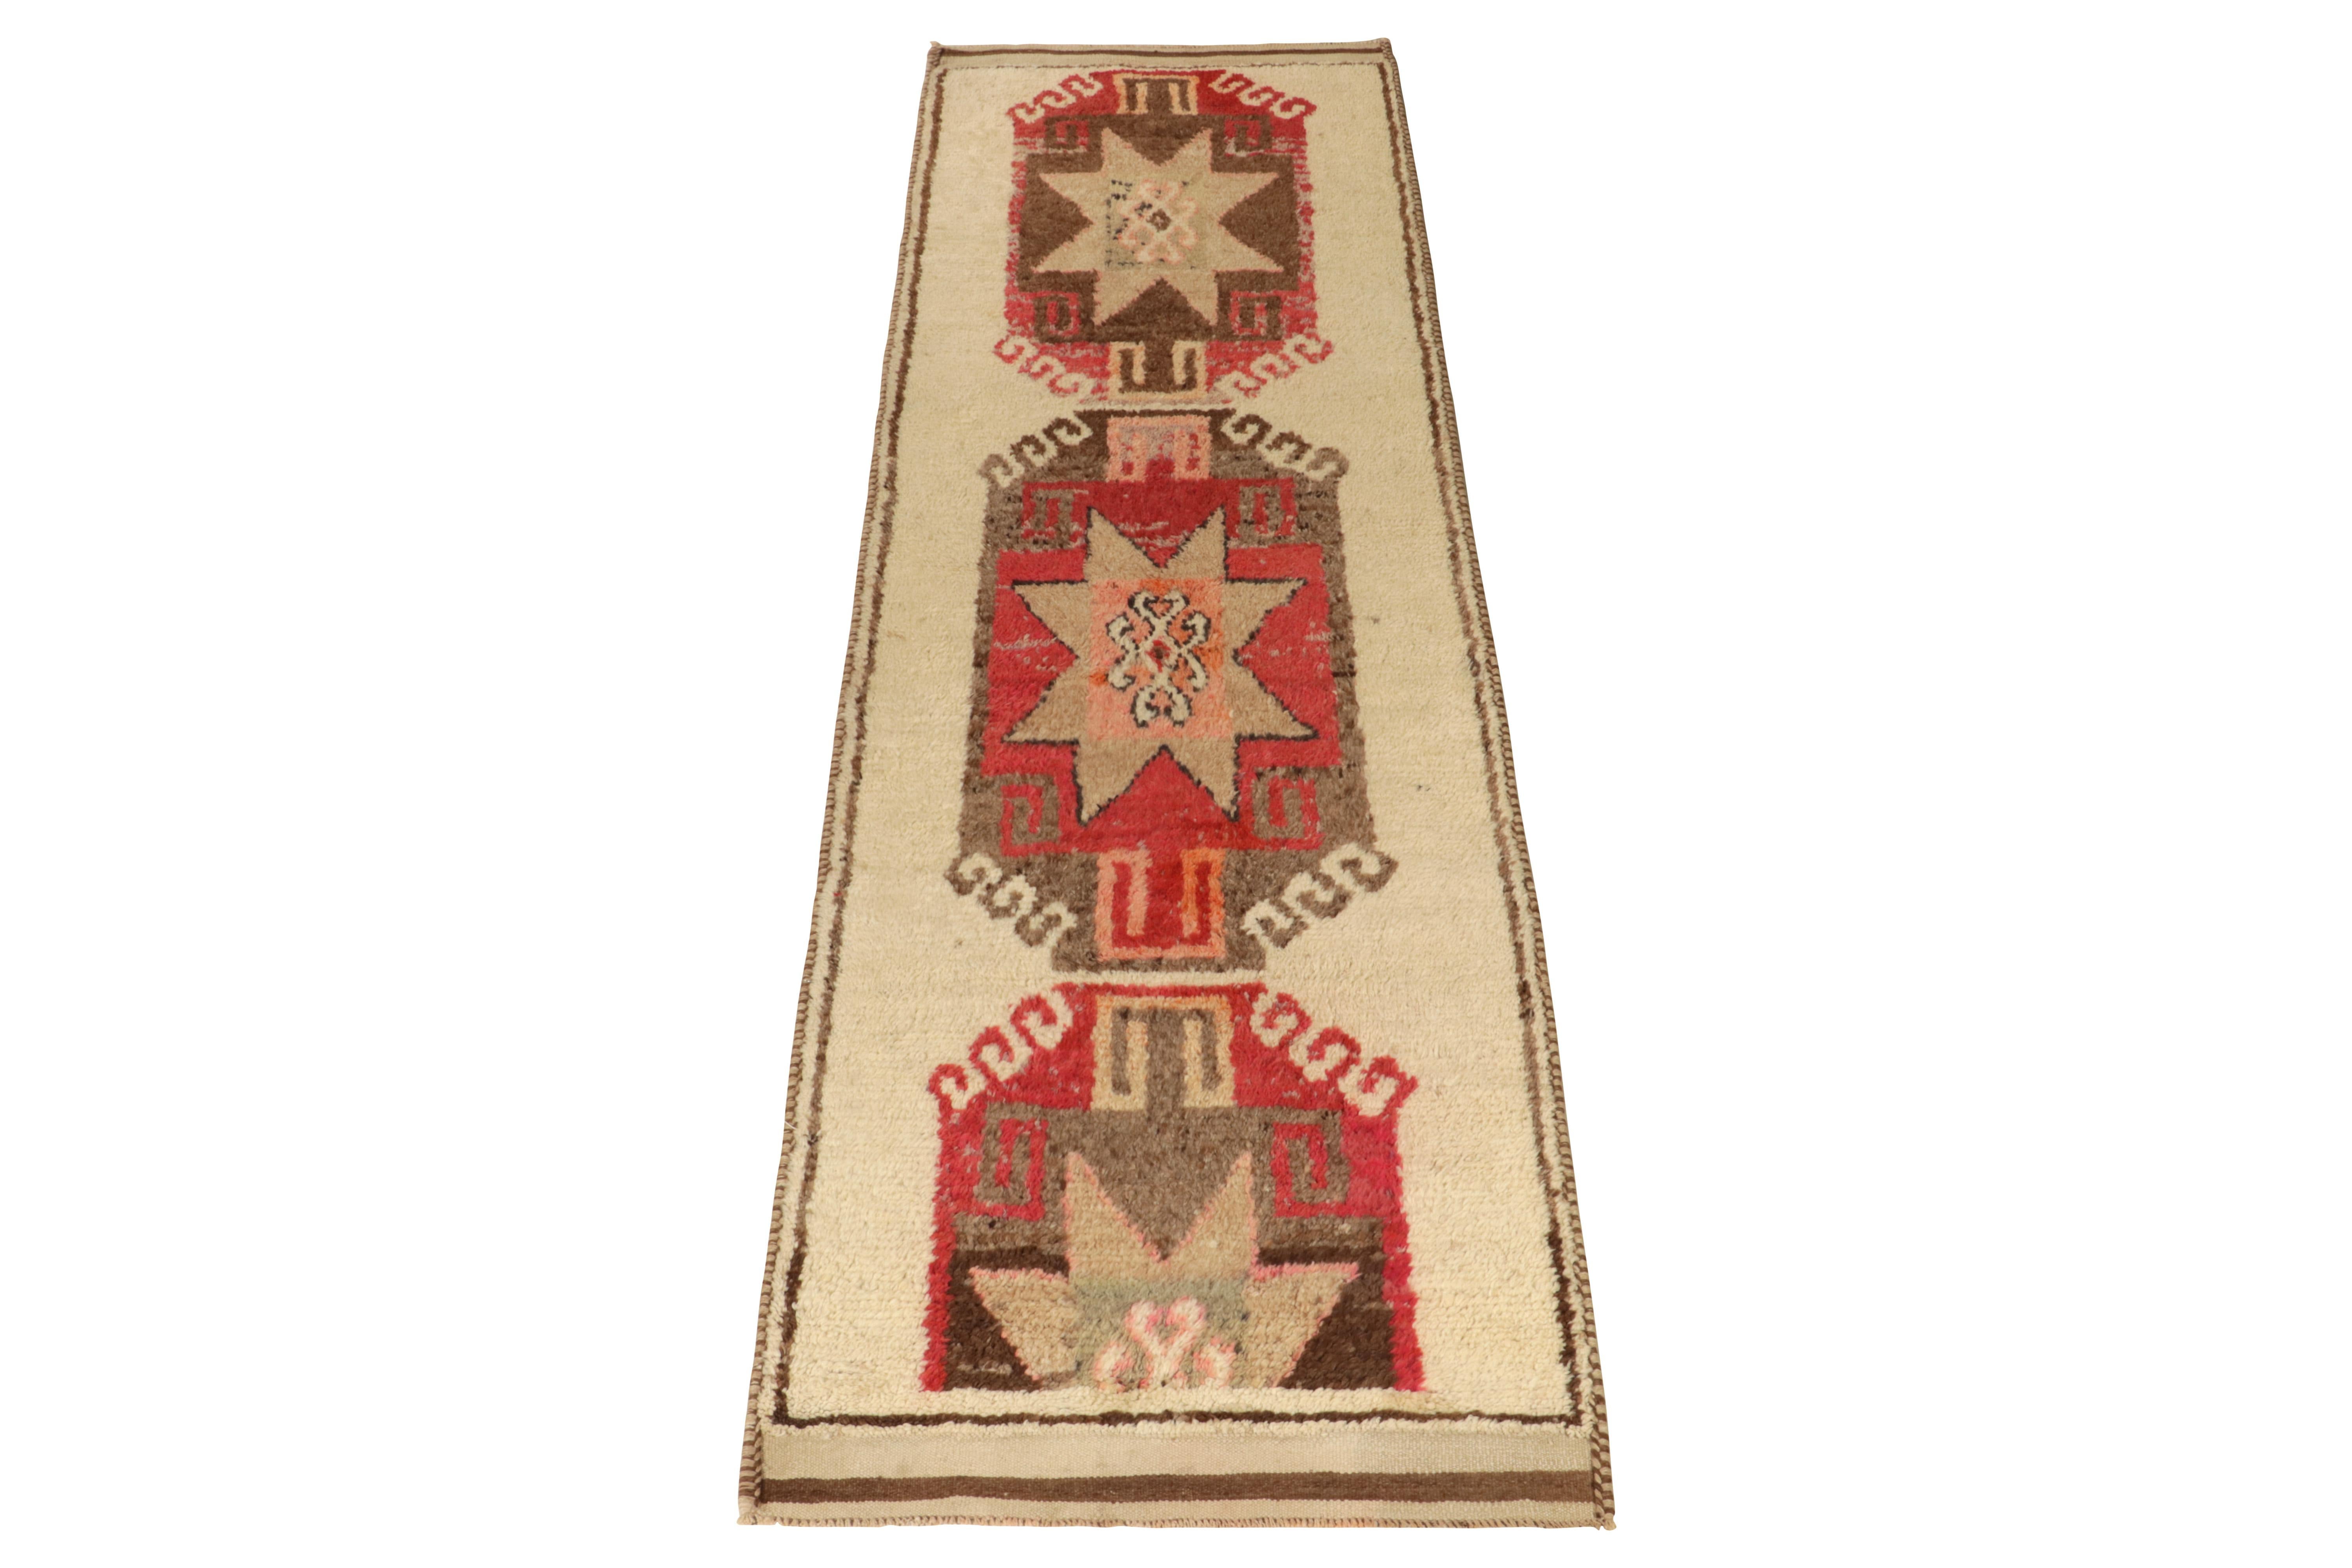 From Rug & Kilim’s vintage selections, a 3x11 hand-knotted wool runner uniquely marrying rich and forgiving hues in nomadic aesthetics.

This 1950s tribal piece from Turkey showcases traditional motifs like medallions on the field in creamy